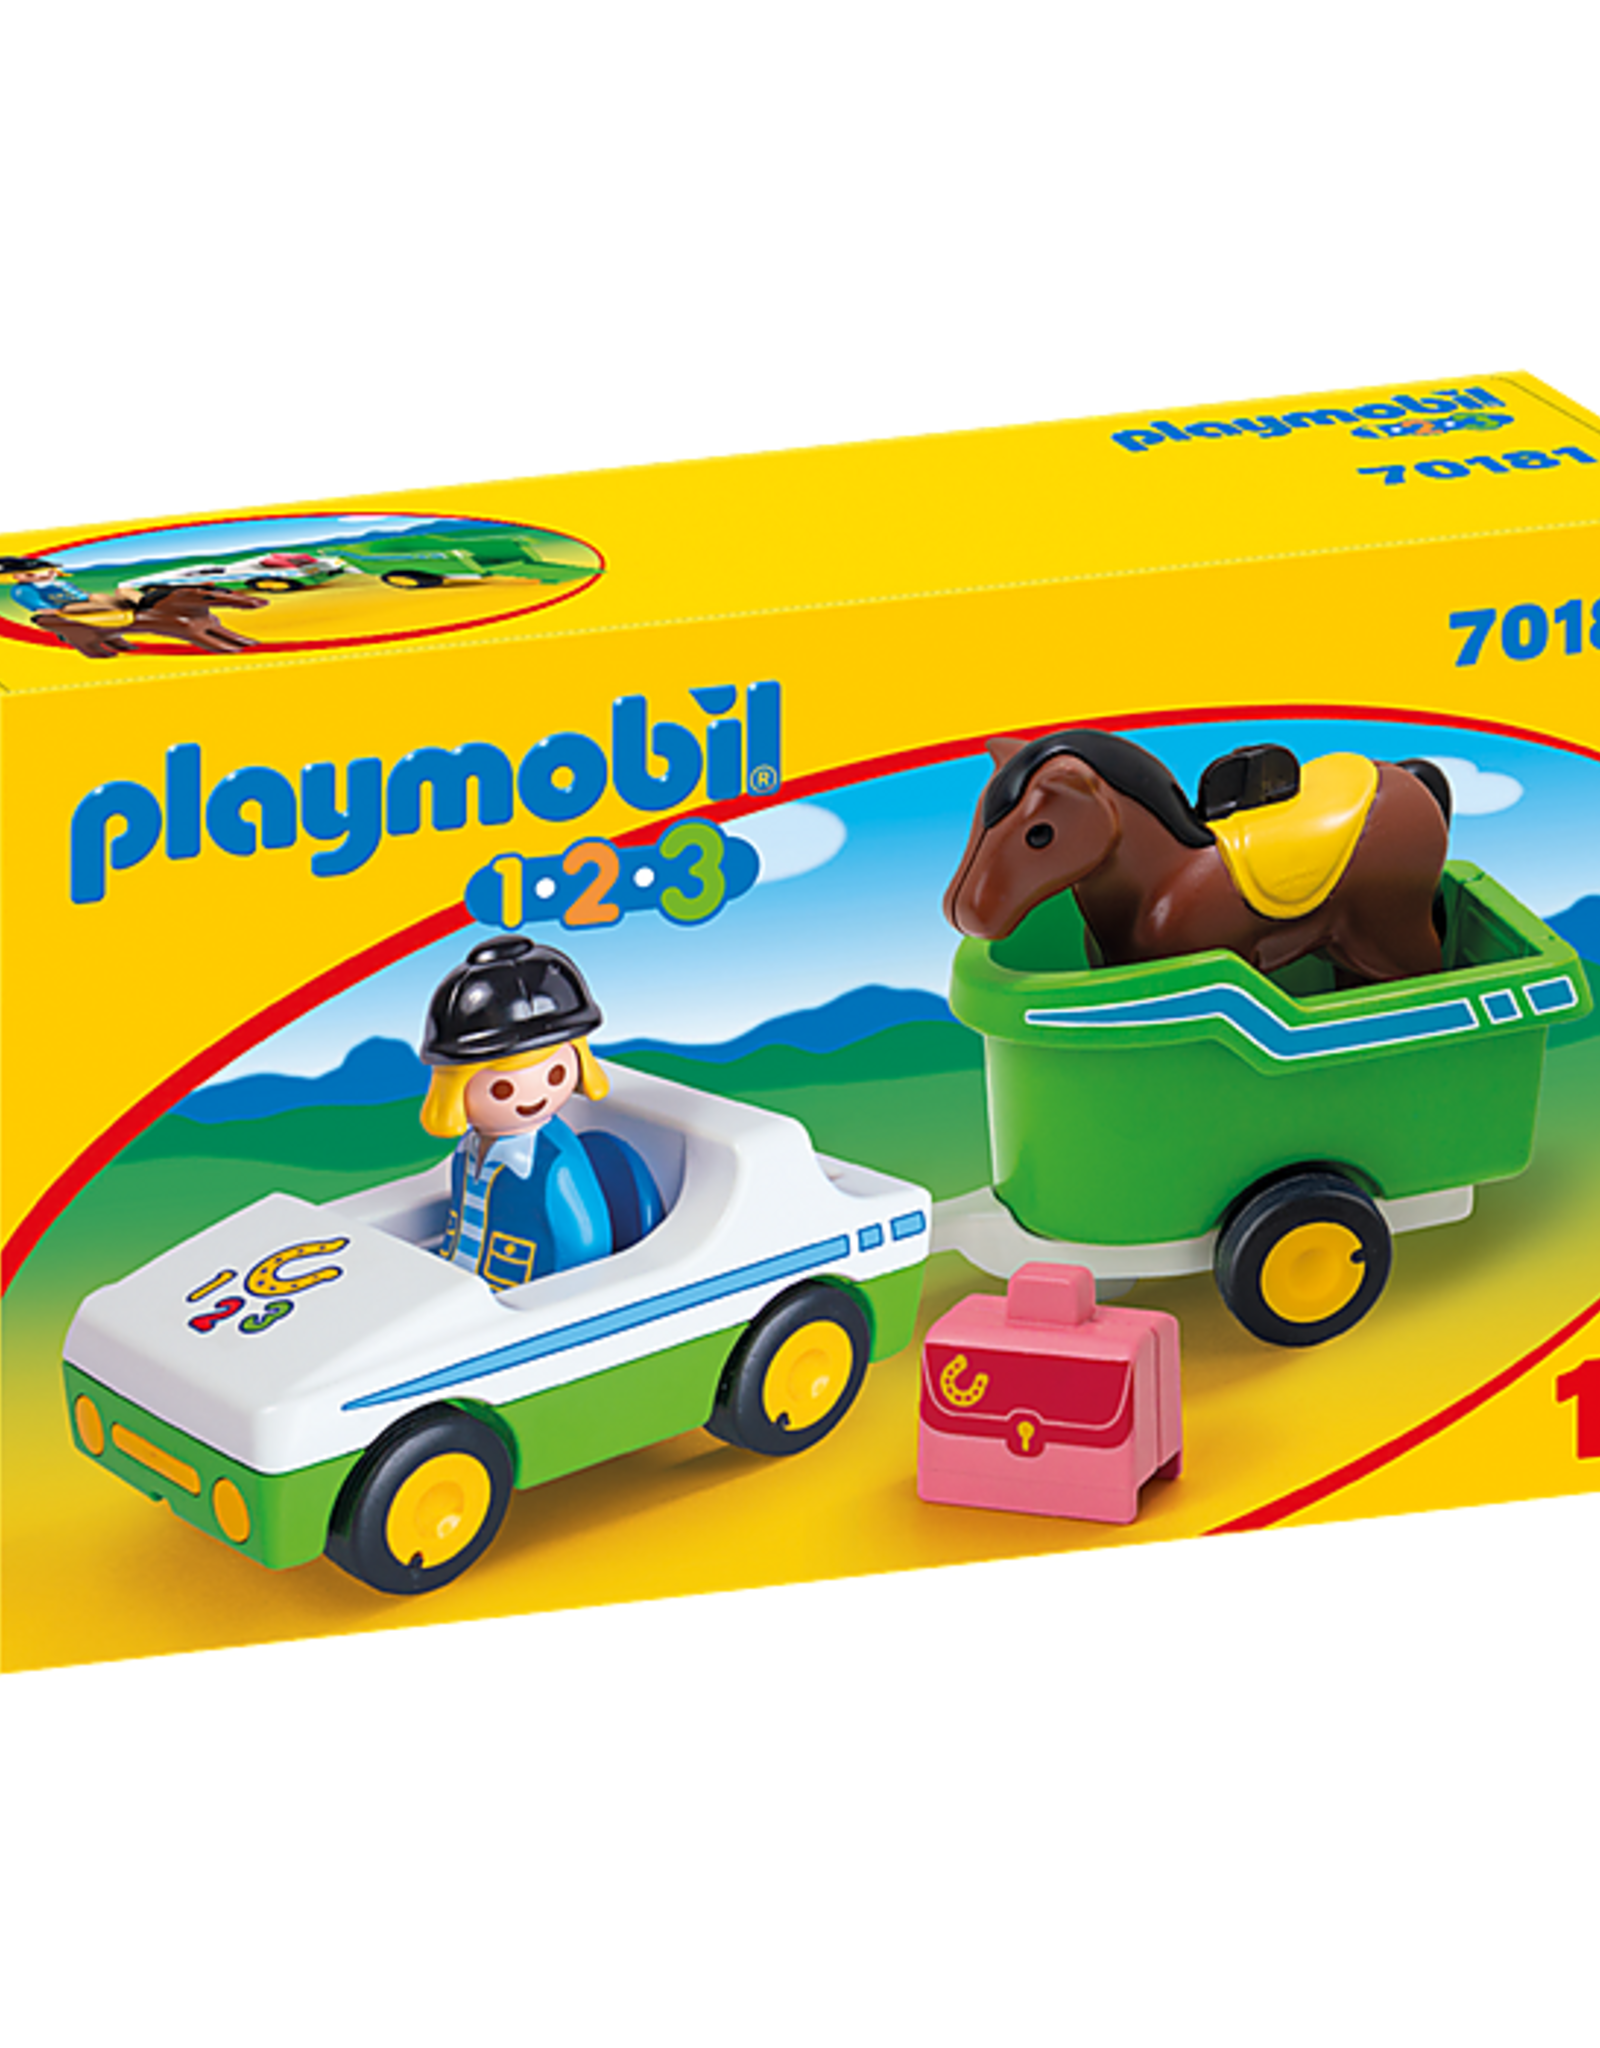 Playmobil 1,2,3 - Car with Horse Trailer